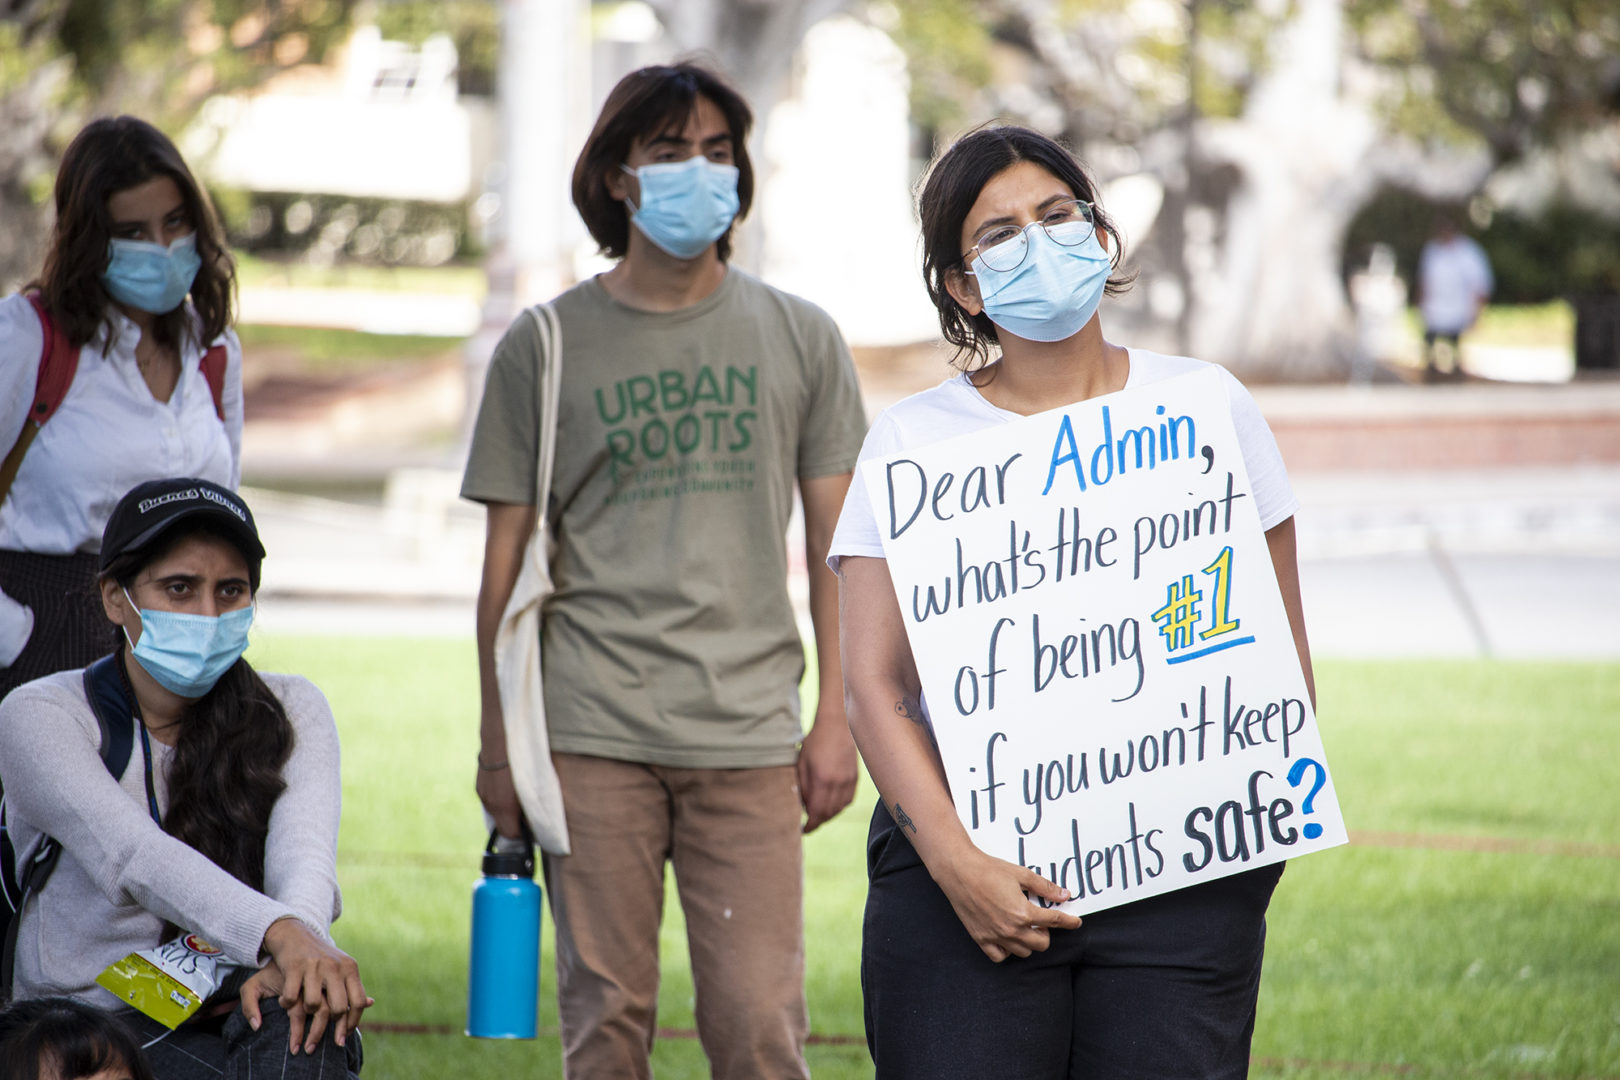 Students wearing face masks participate at the protest. One with glasses holds a sign that reads "Dear Admin, what's the point of being #1 if you won't keep us safe?"